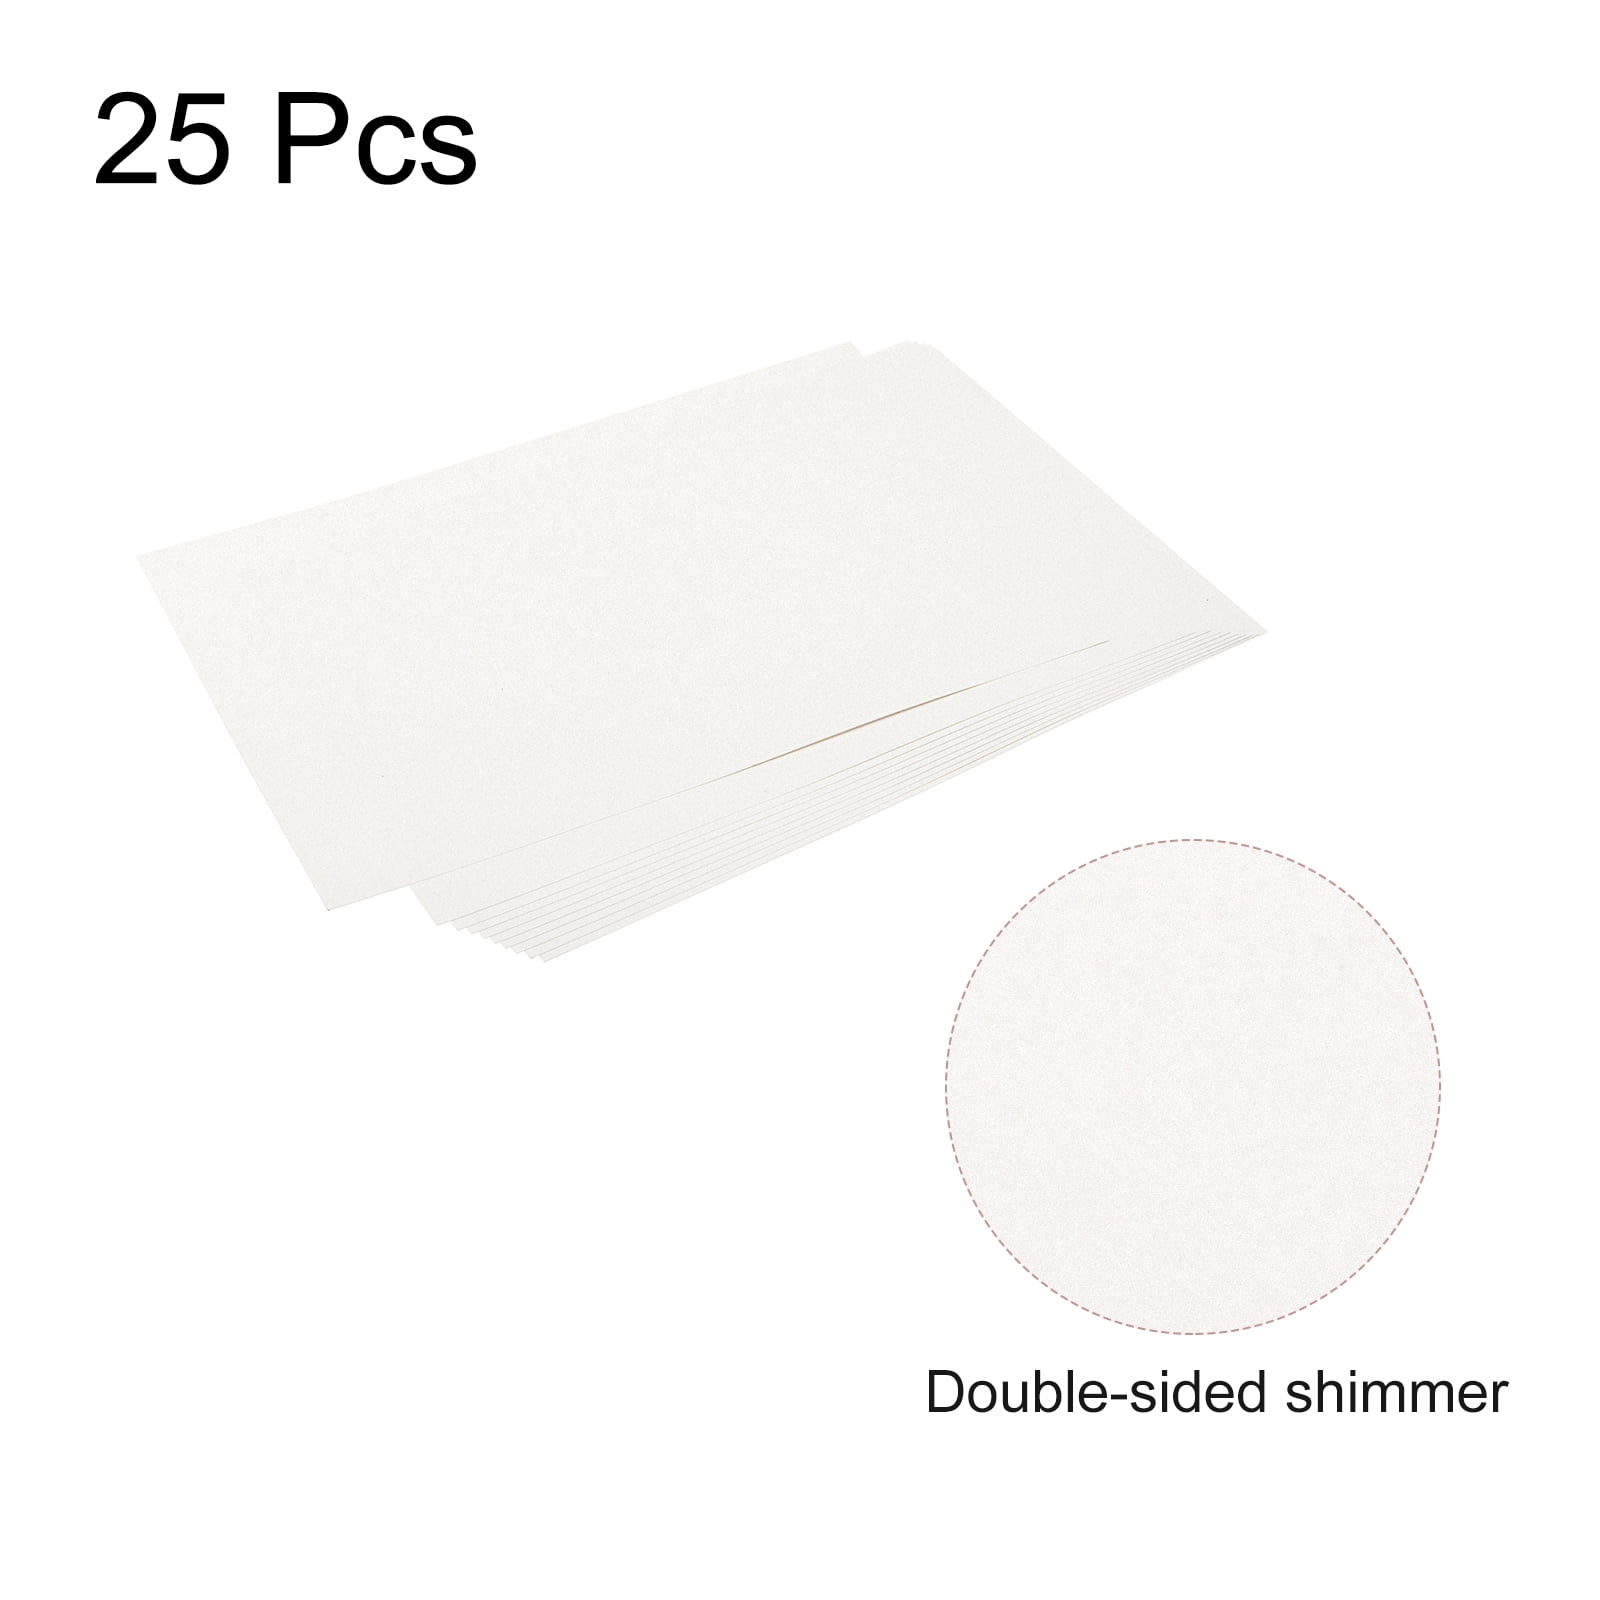 White 8.5'' x 11''Cardstock Paper,250gsm/92bl Thick Paper-25sheet Premium  White Construction Paper,Double Sided Printer Paper,for Christmas